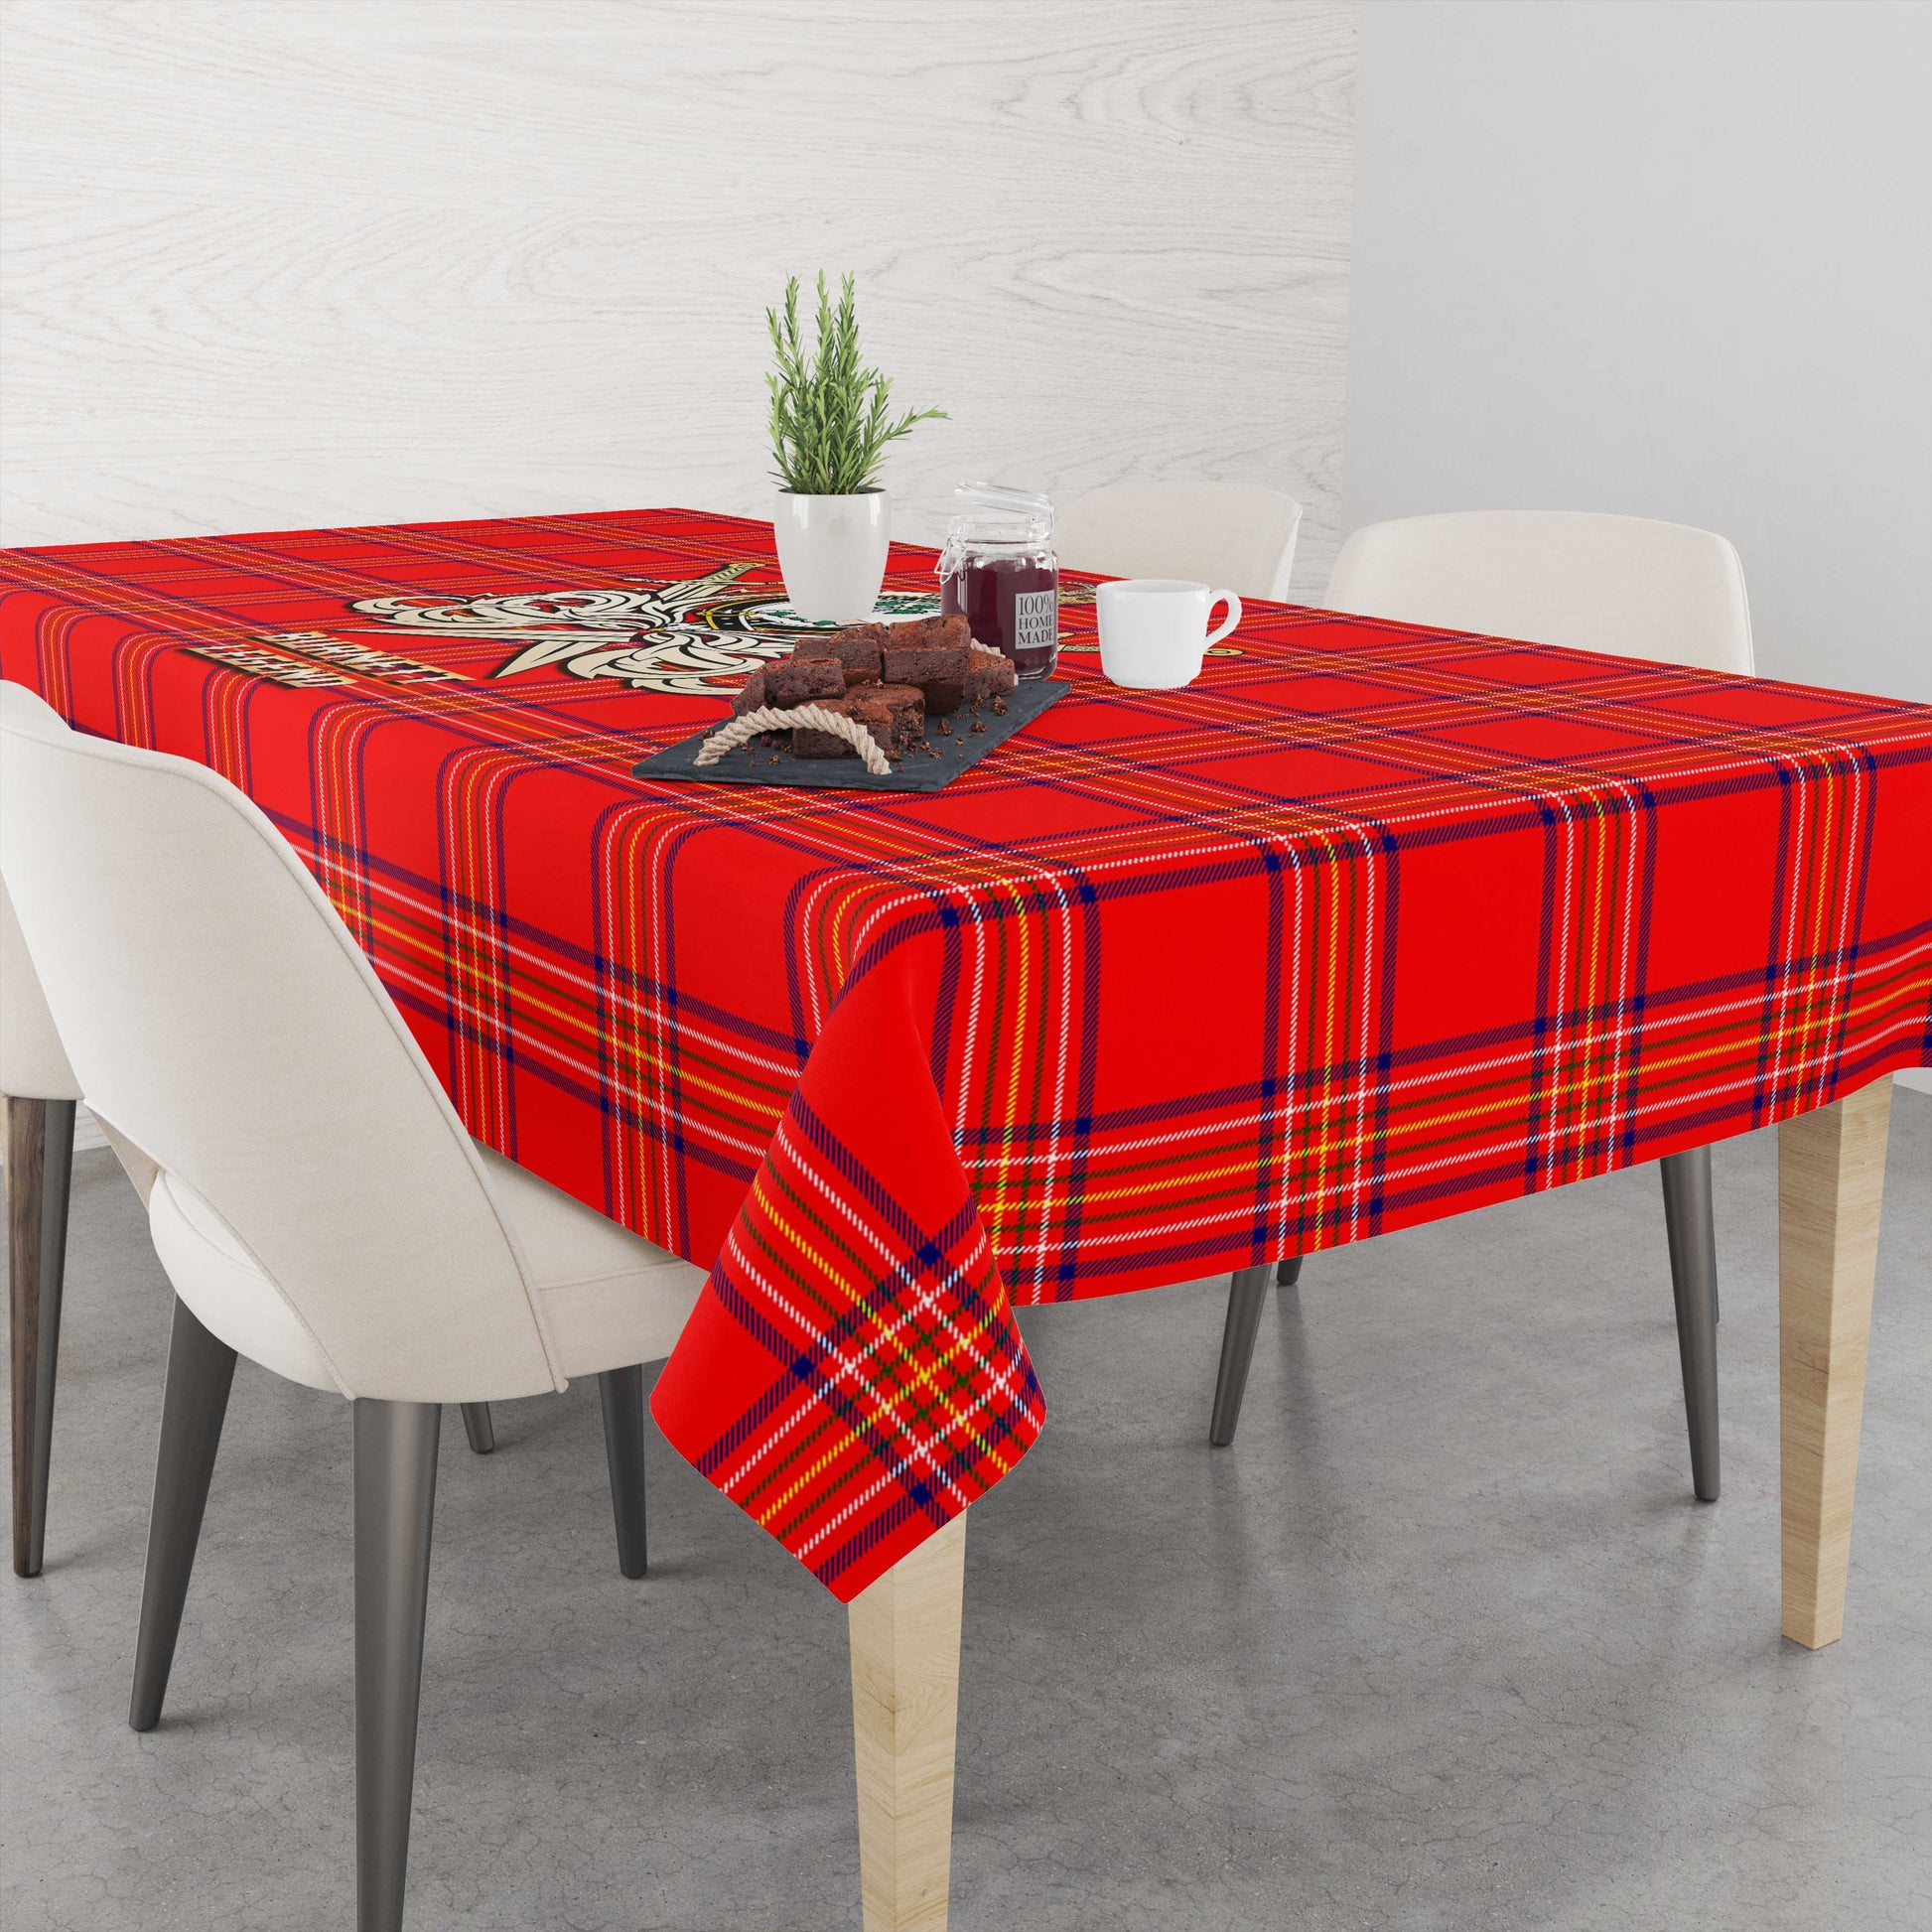 Tartan Vibes Clothing Burnett Modern Tartan Tablecloth with Clan Crest and the Golden Sword of Courageous Legacy